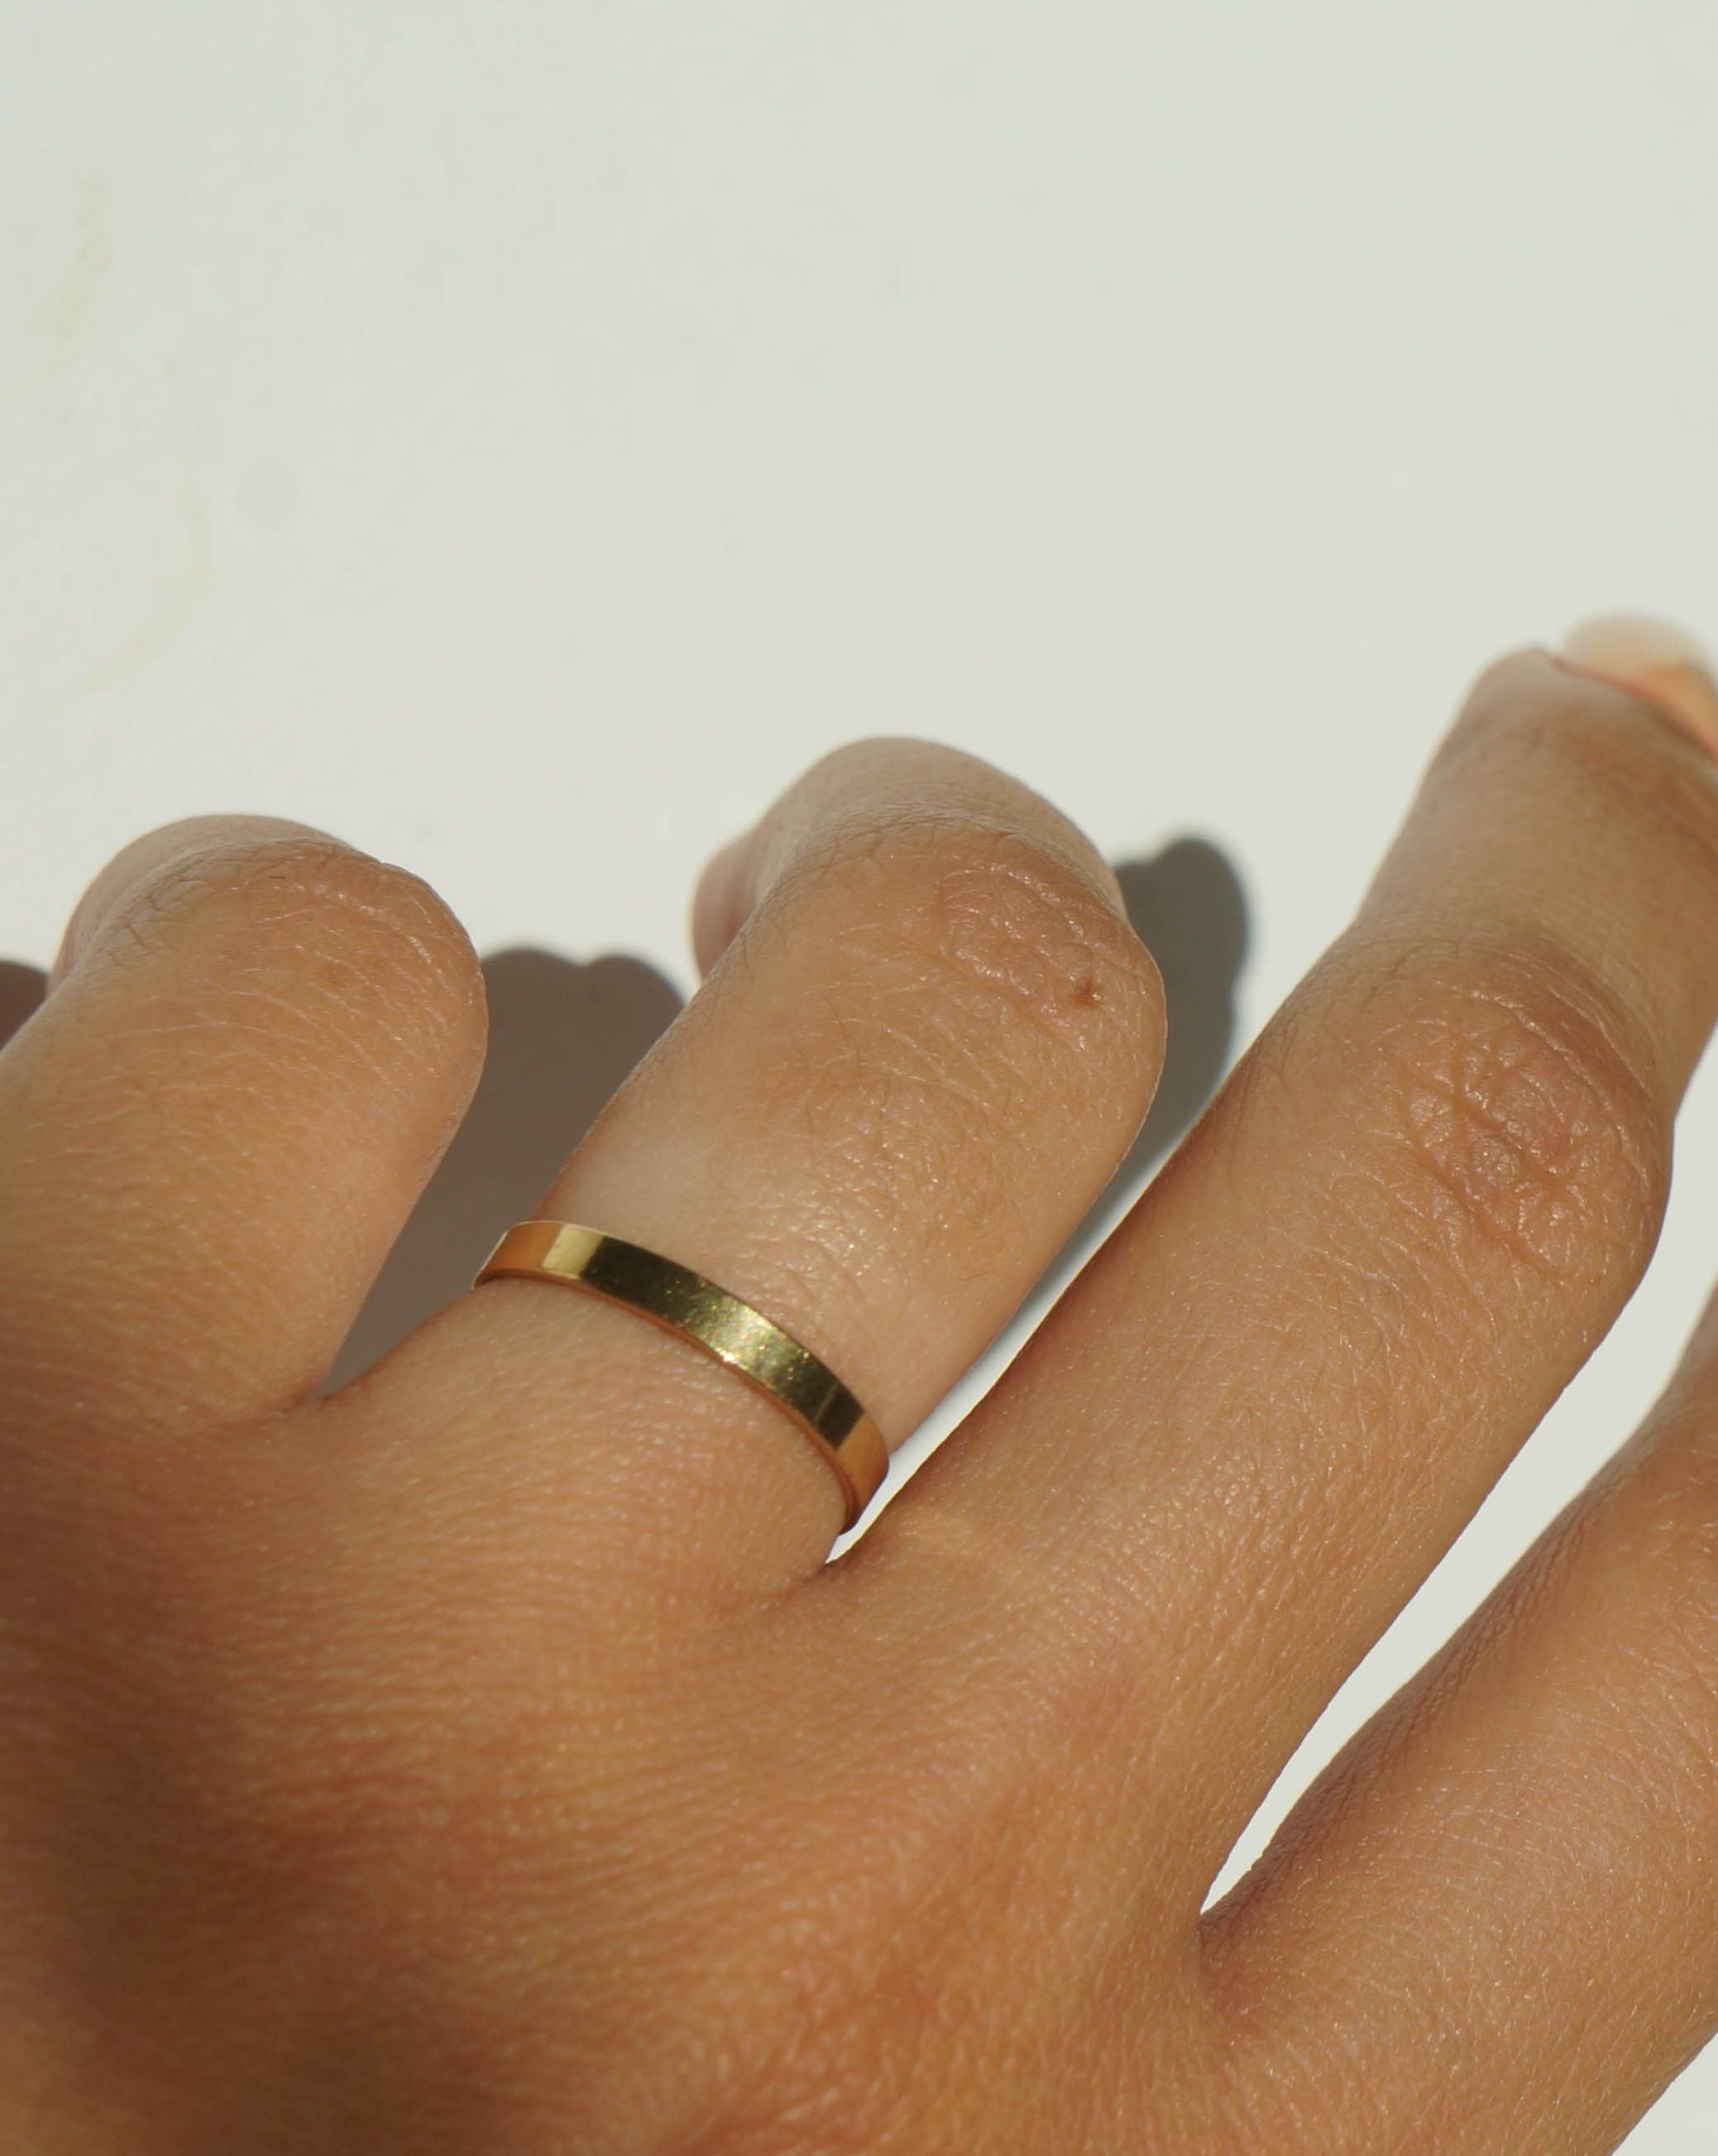 Thin Ring by KOZAKH. A 2mm flat ring, crafted in 14K Gold Filled.